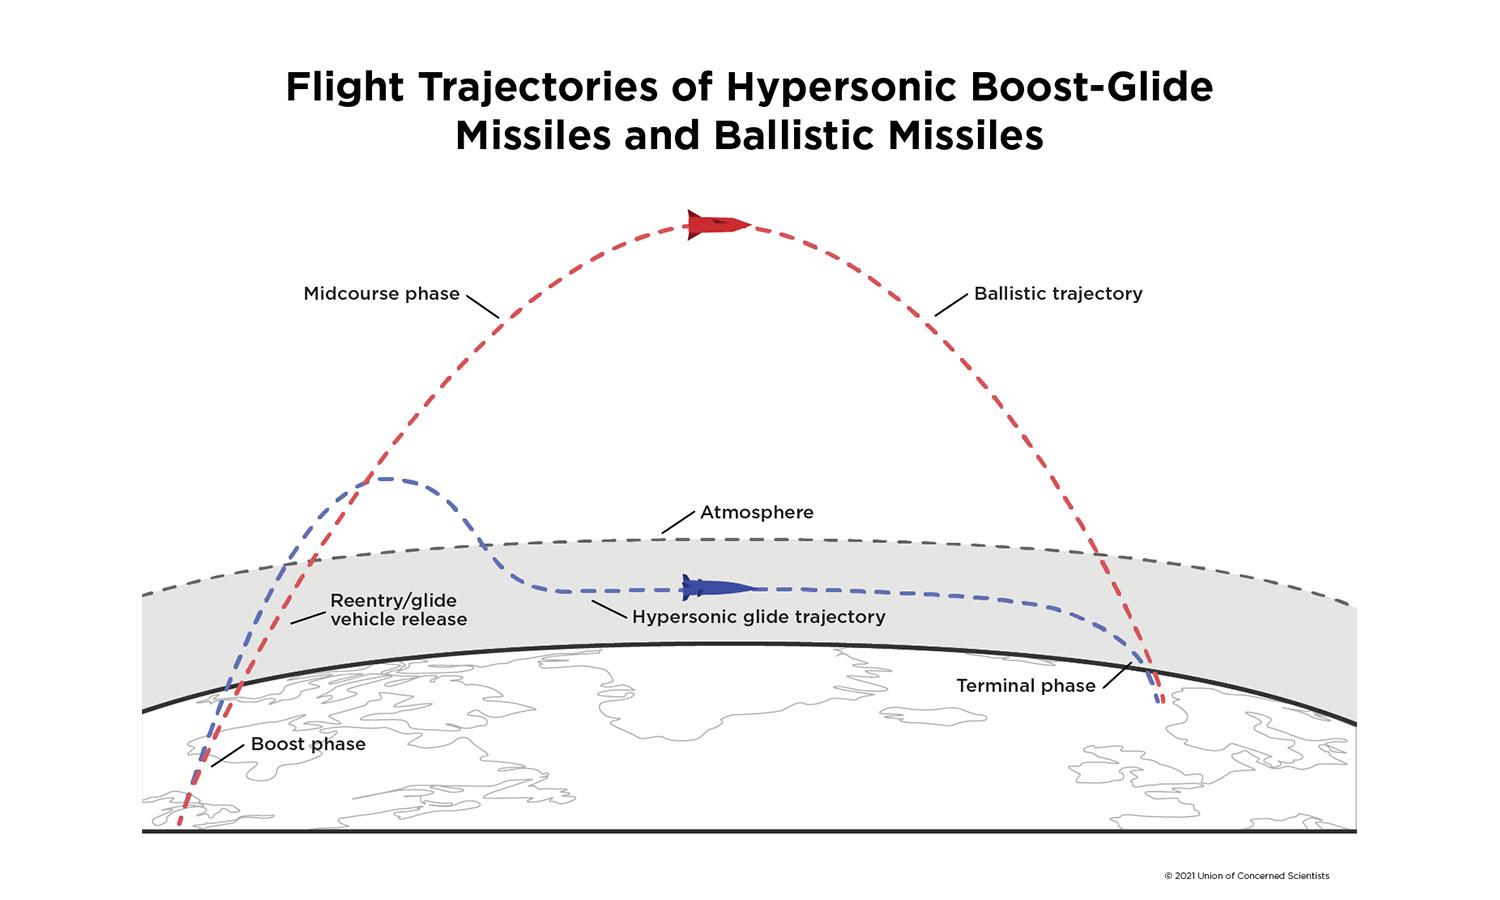 Illustration of flight trajectories of hypersonic boost glide and ballistic missiles